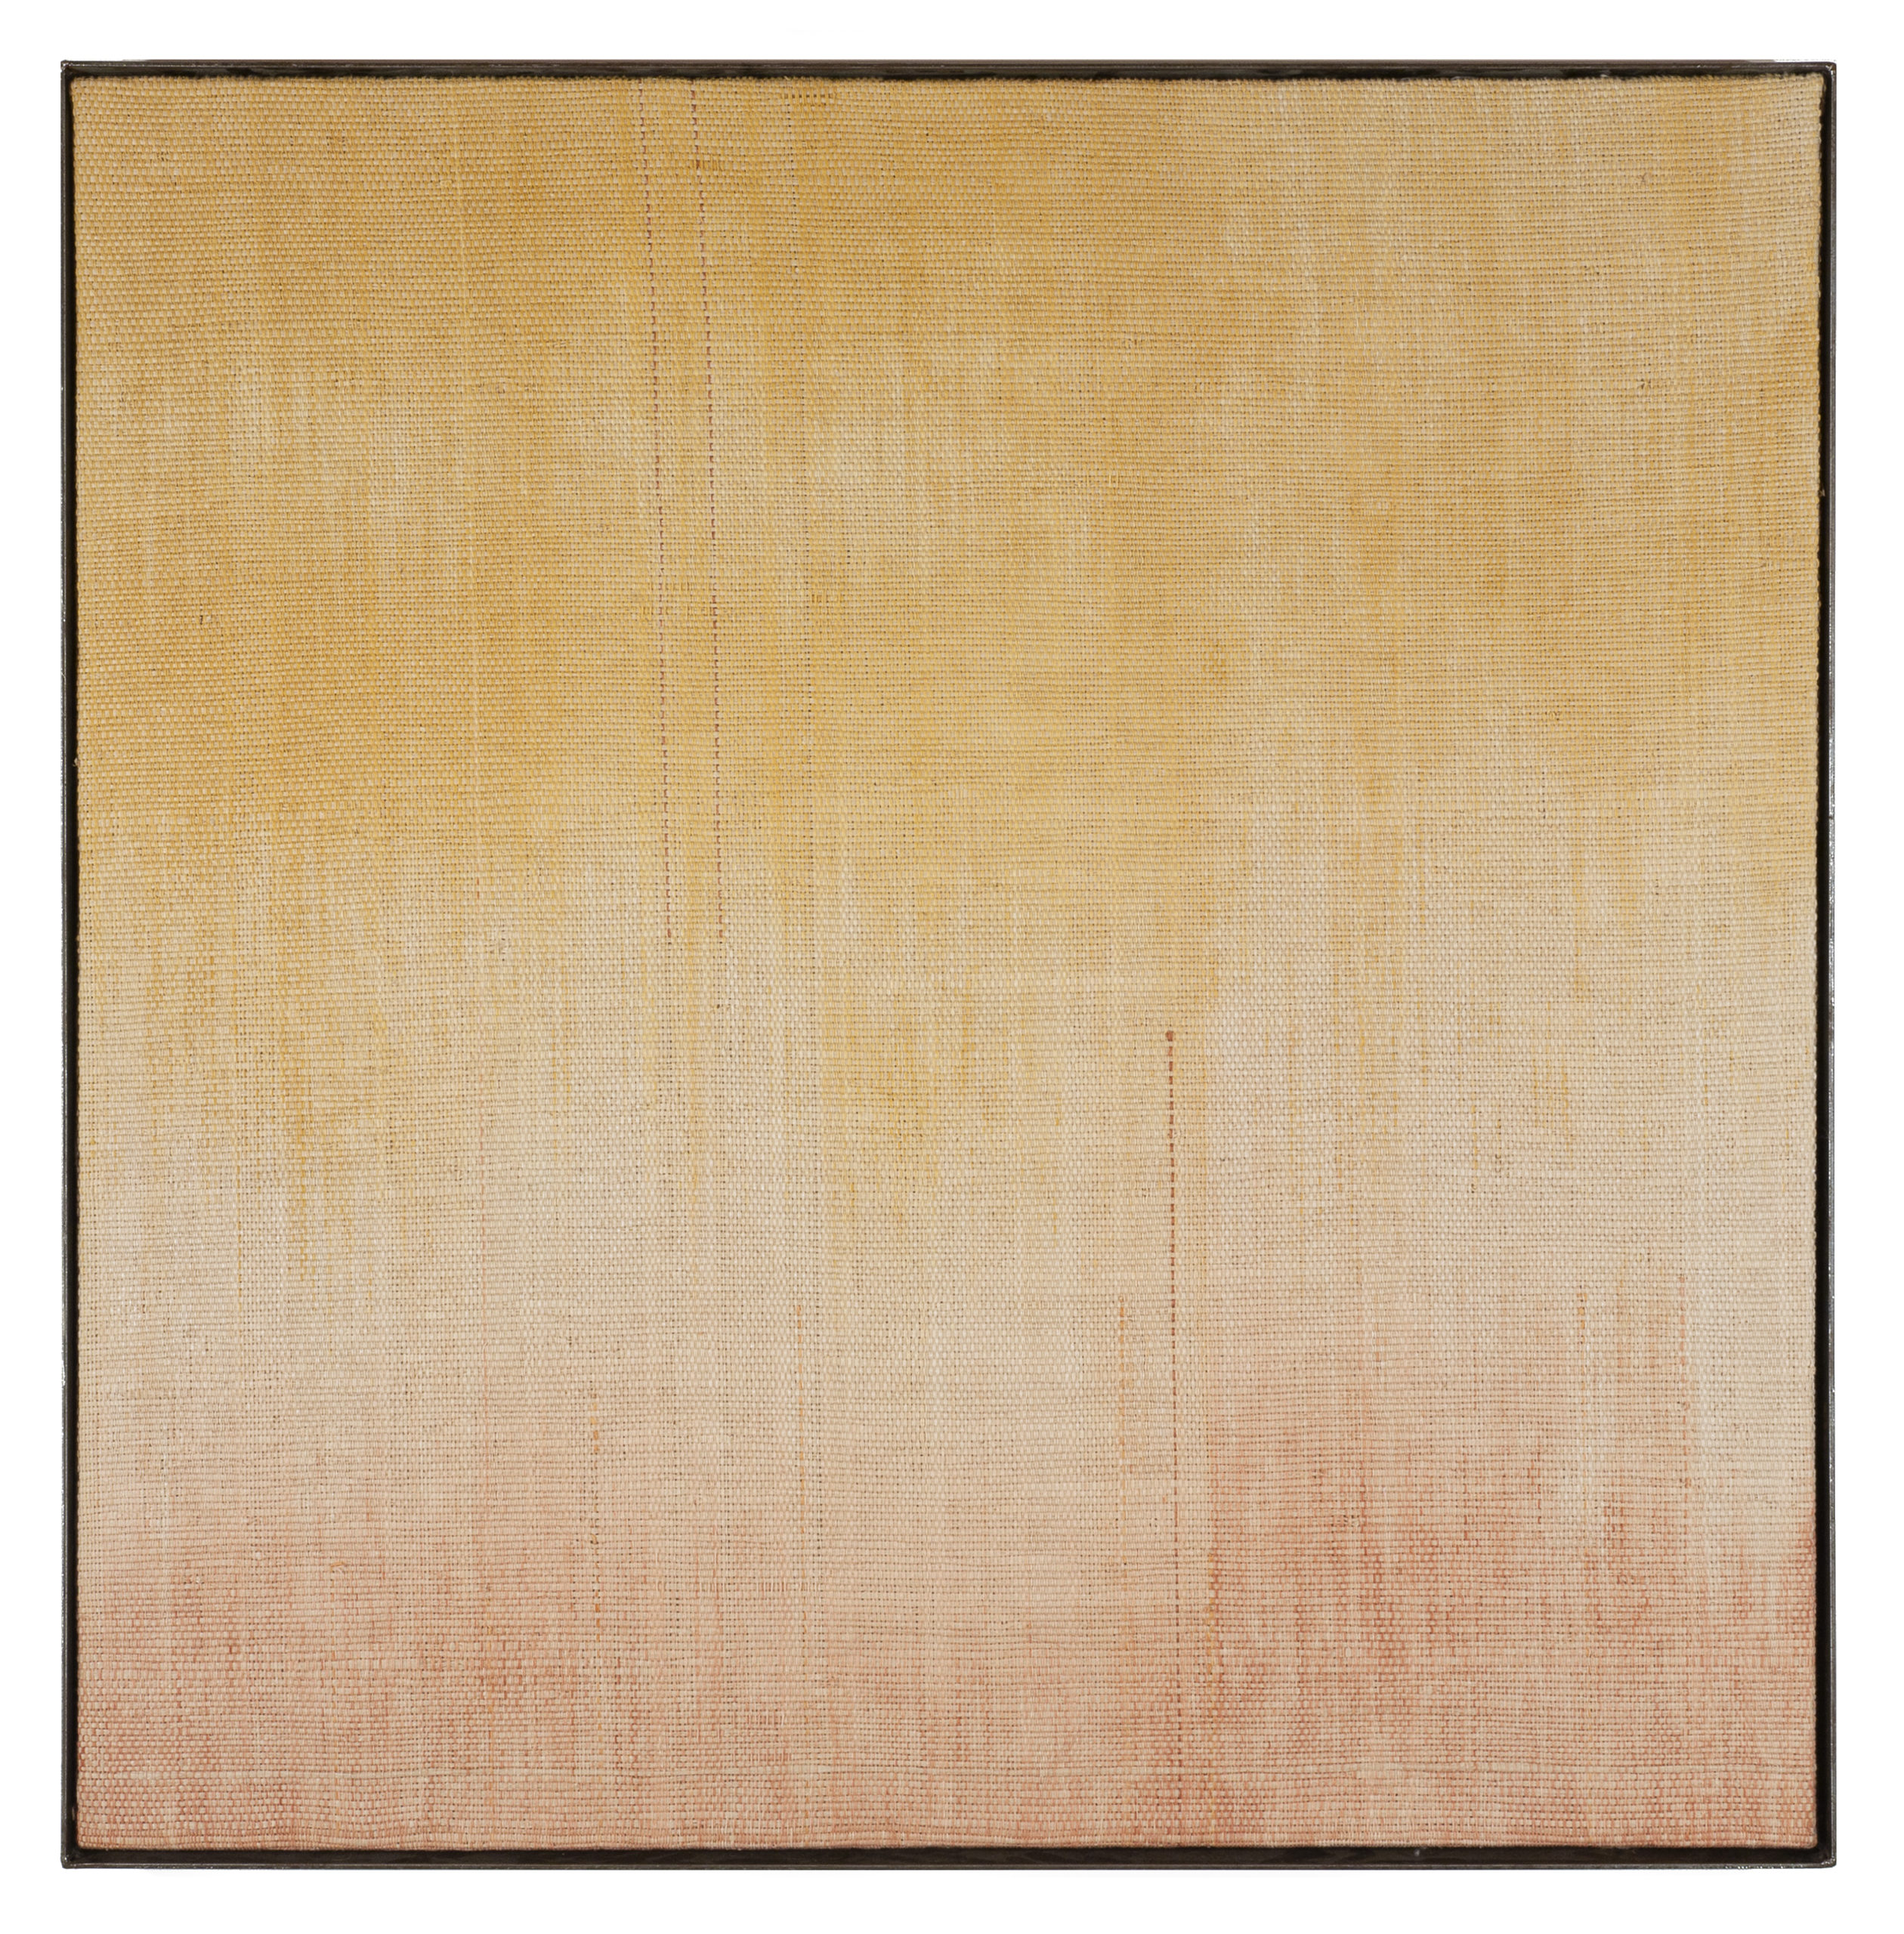 

											Will Clift and Elizabeth Hohimer</b>

											<em>
												Desert Variations</em> 

											<h4>
												Santa Fe: May 28 - July 30, 2022											</h4>

		                																																<i>Just a Little Bit Longer Where It's Warm,</i>  
																																								2021, 
																																								West Texas cotton dyed with collected clay, pine paper, and silk tapestry in steel frame., 
																																								37 x 36 3/4 x 2 1/2 inches 
																								
		                				